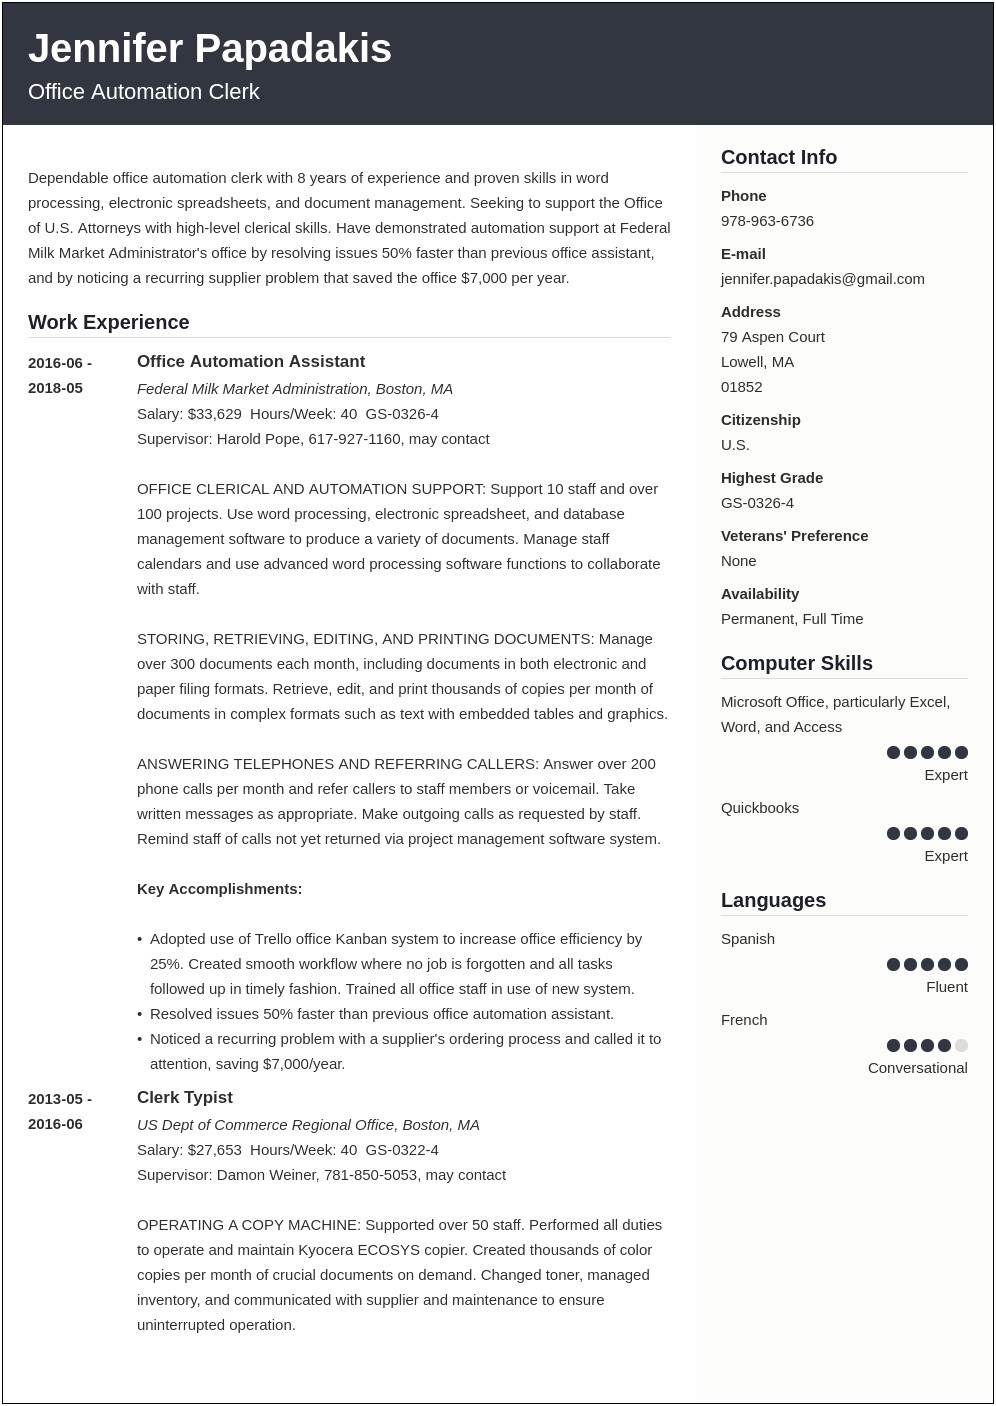 Federal Job Best Qualified Resume Job Experience Ranking